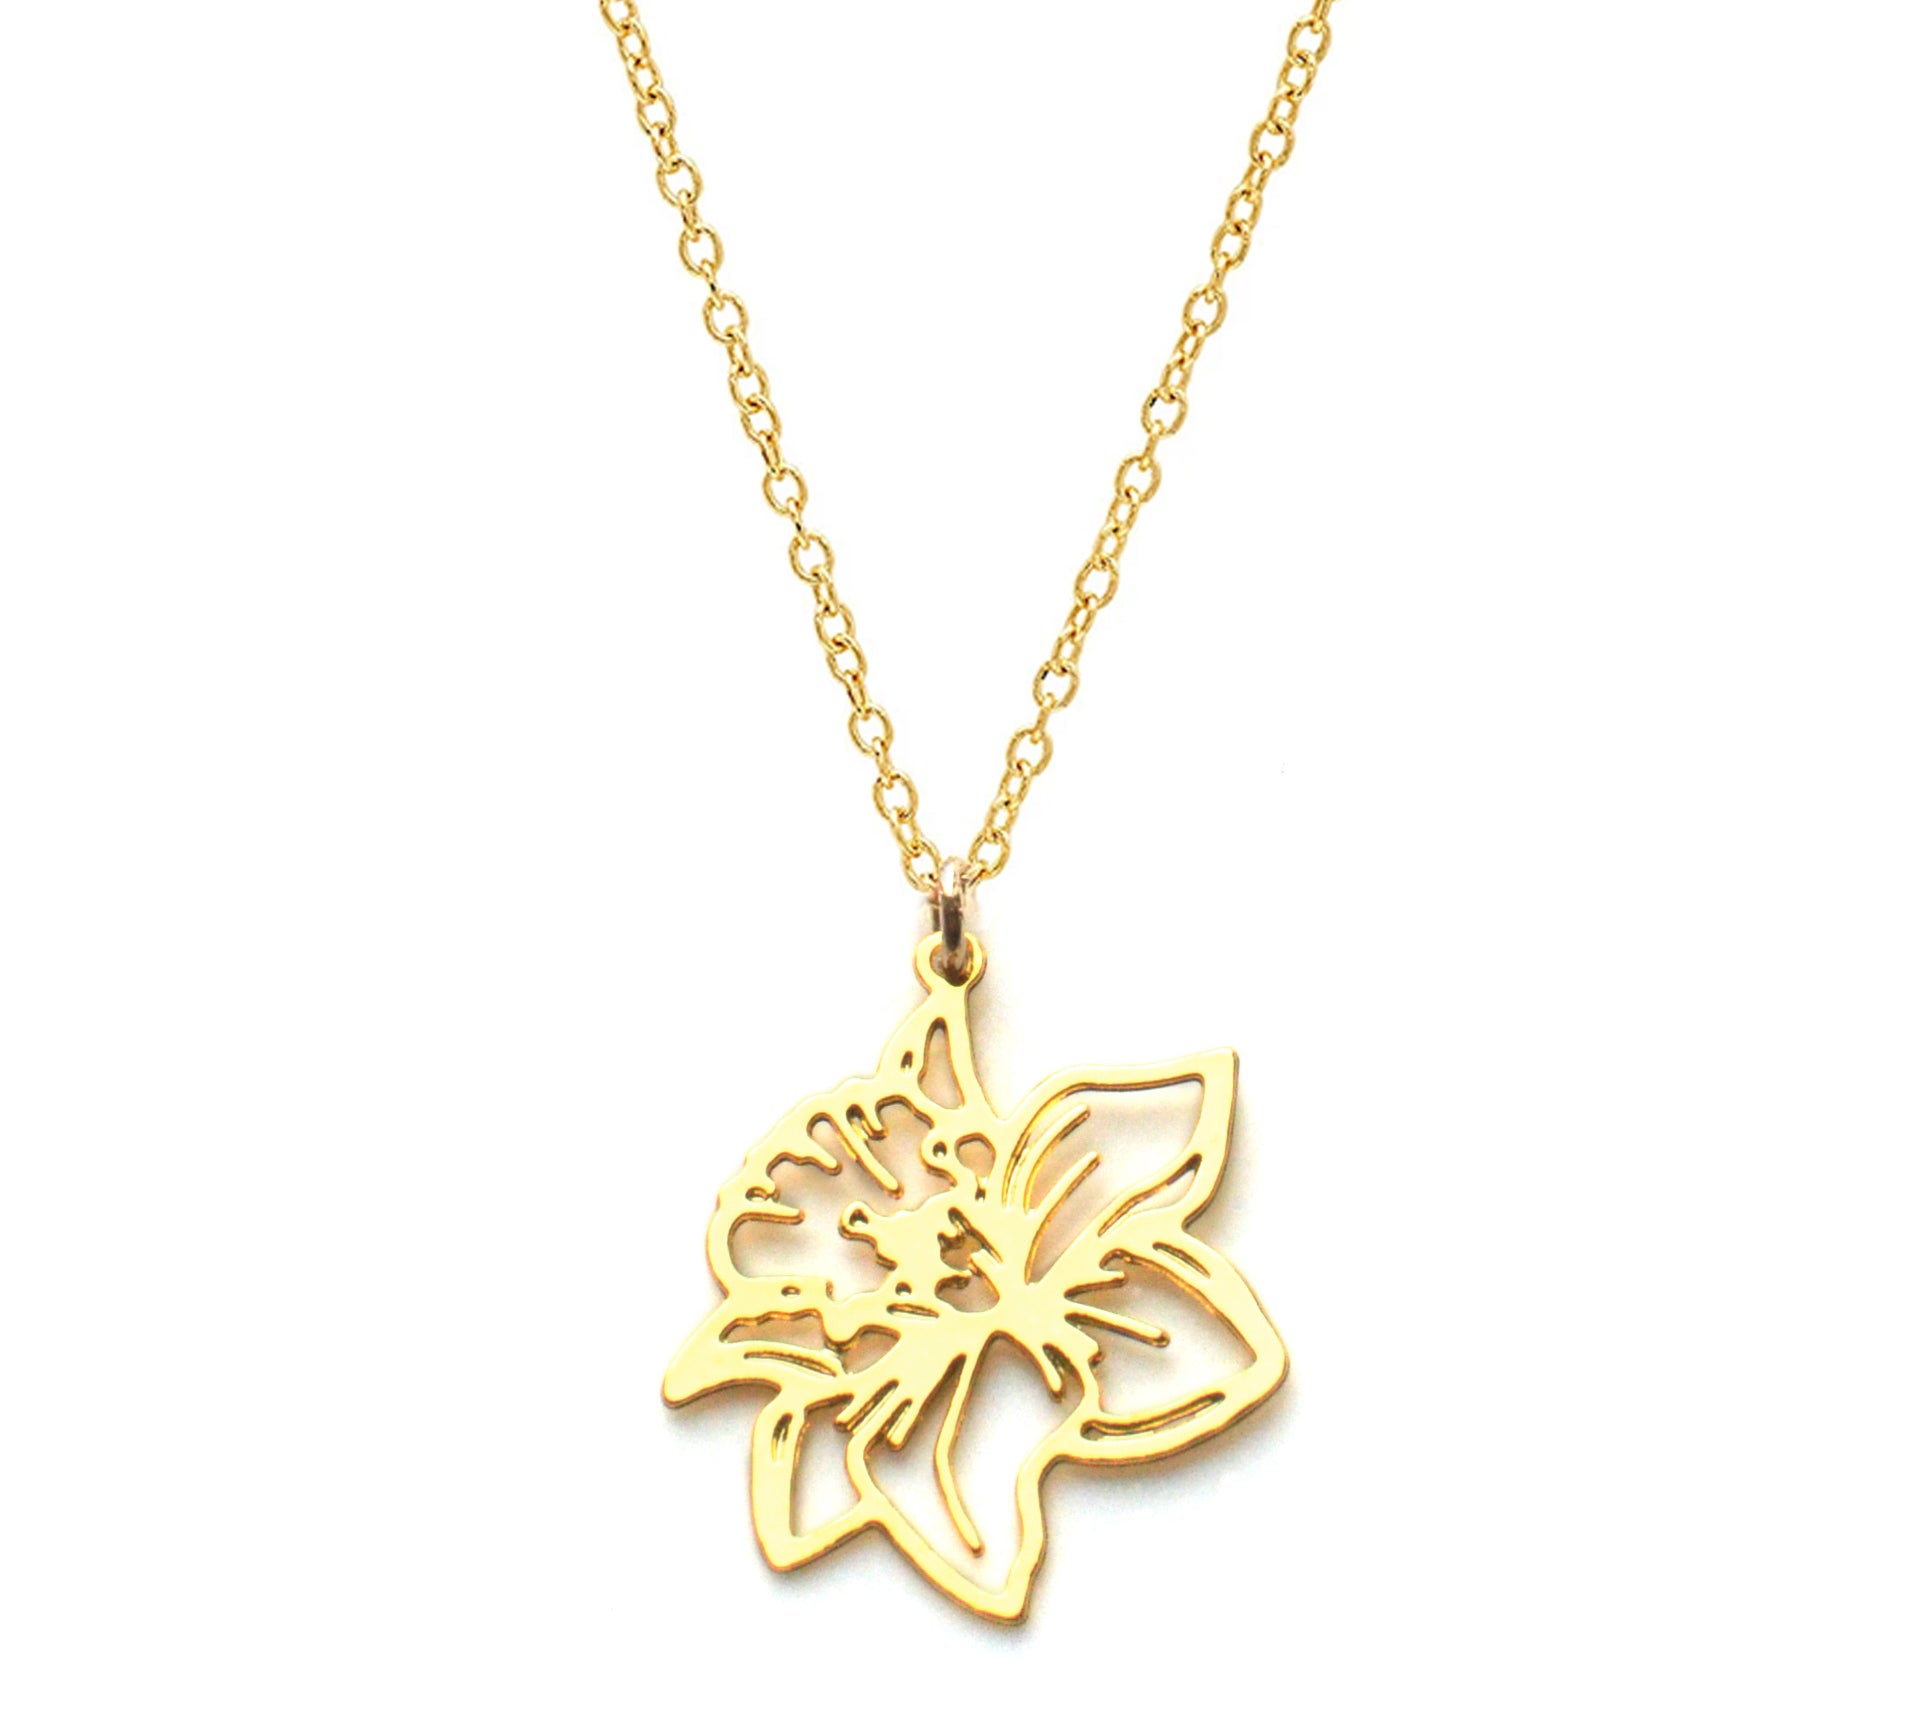 Daffodil Necklace - High Quality, Affordable, Whimsical, Hand Drawn Necklace - March Birthday Gift - Available in Gold and Silver - Made in USA - Brevity Jewelry